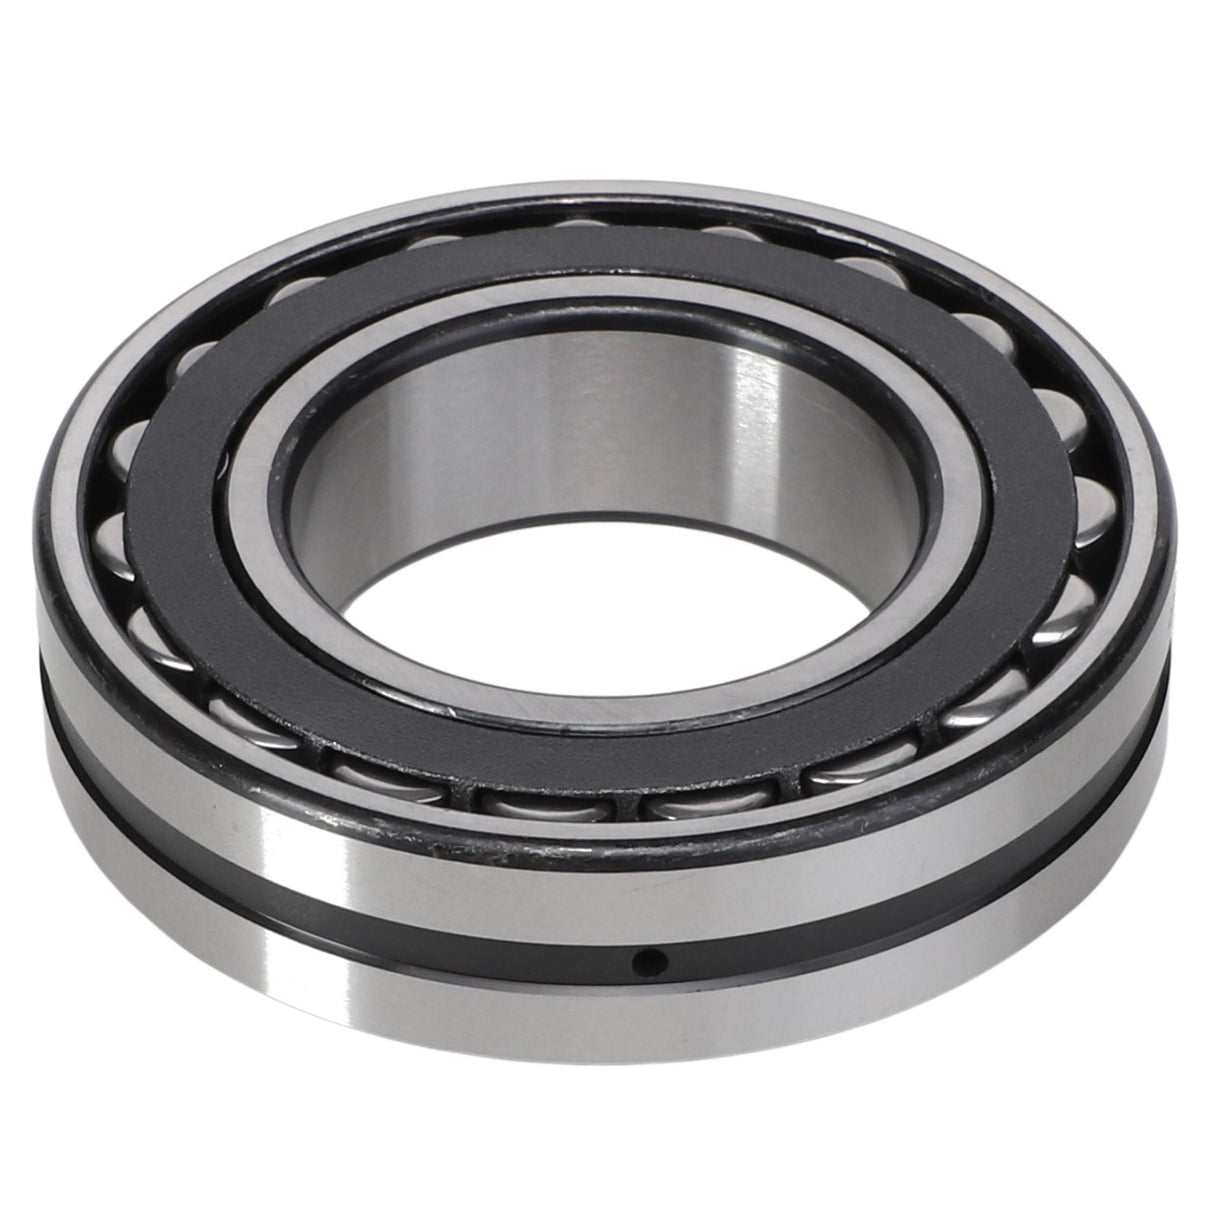 AGCO | Spherical Roller Bearing - 0922-40-11-00 - Farming Parts